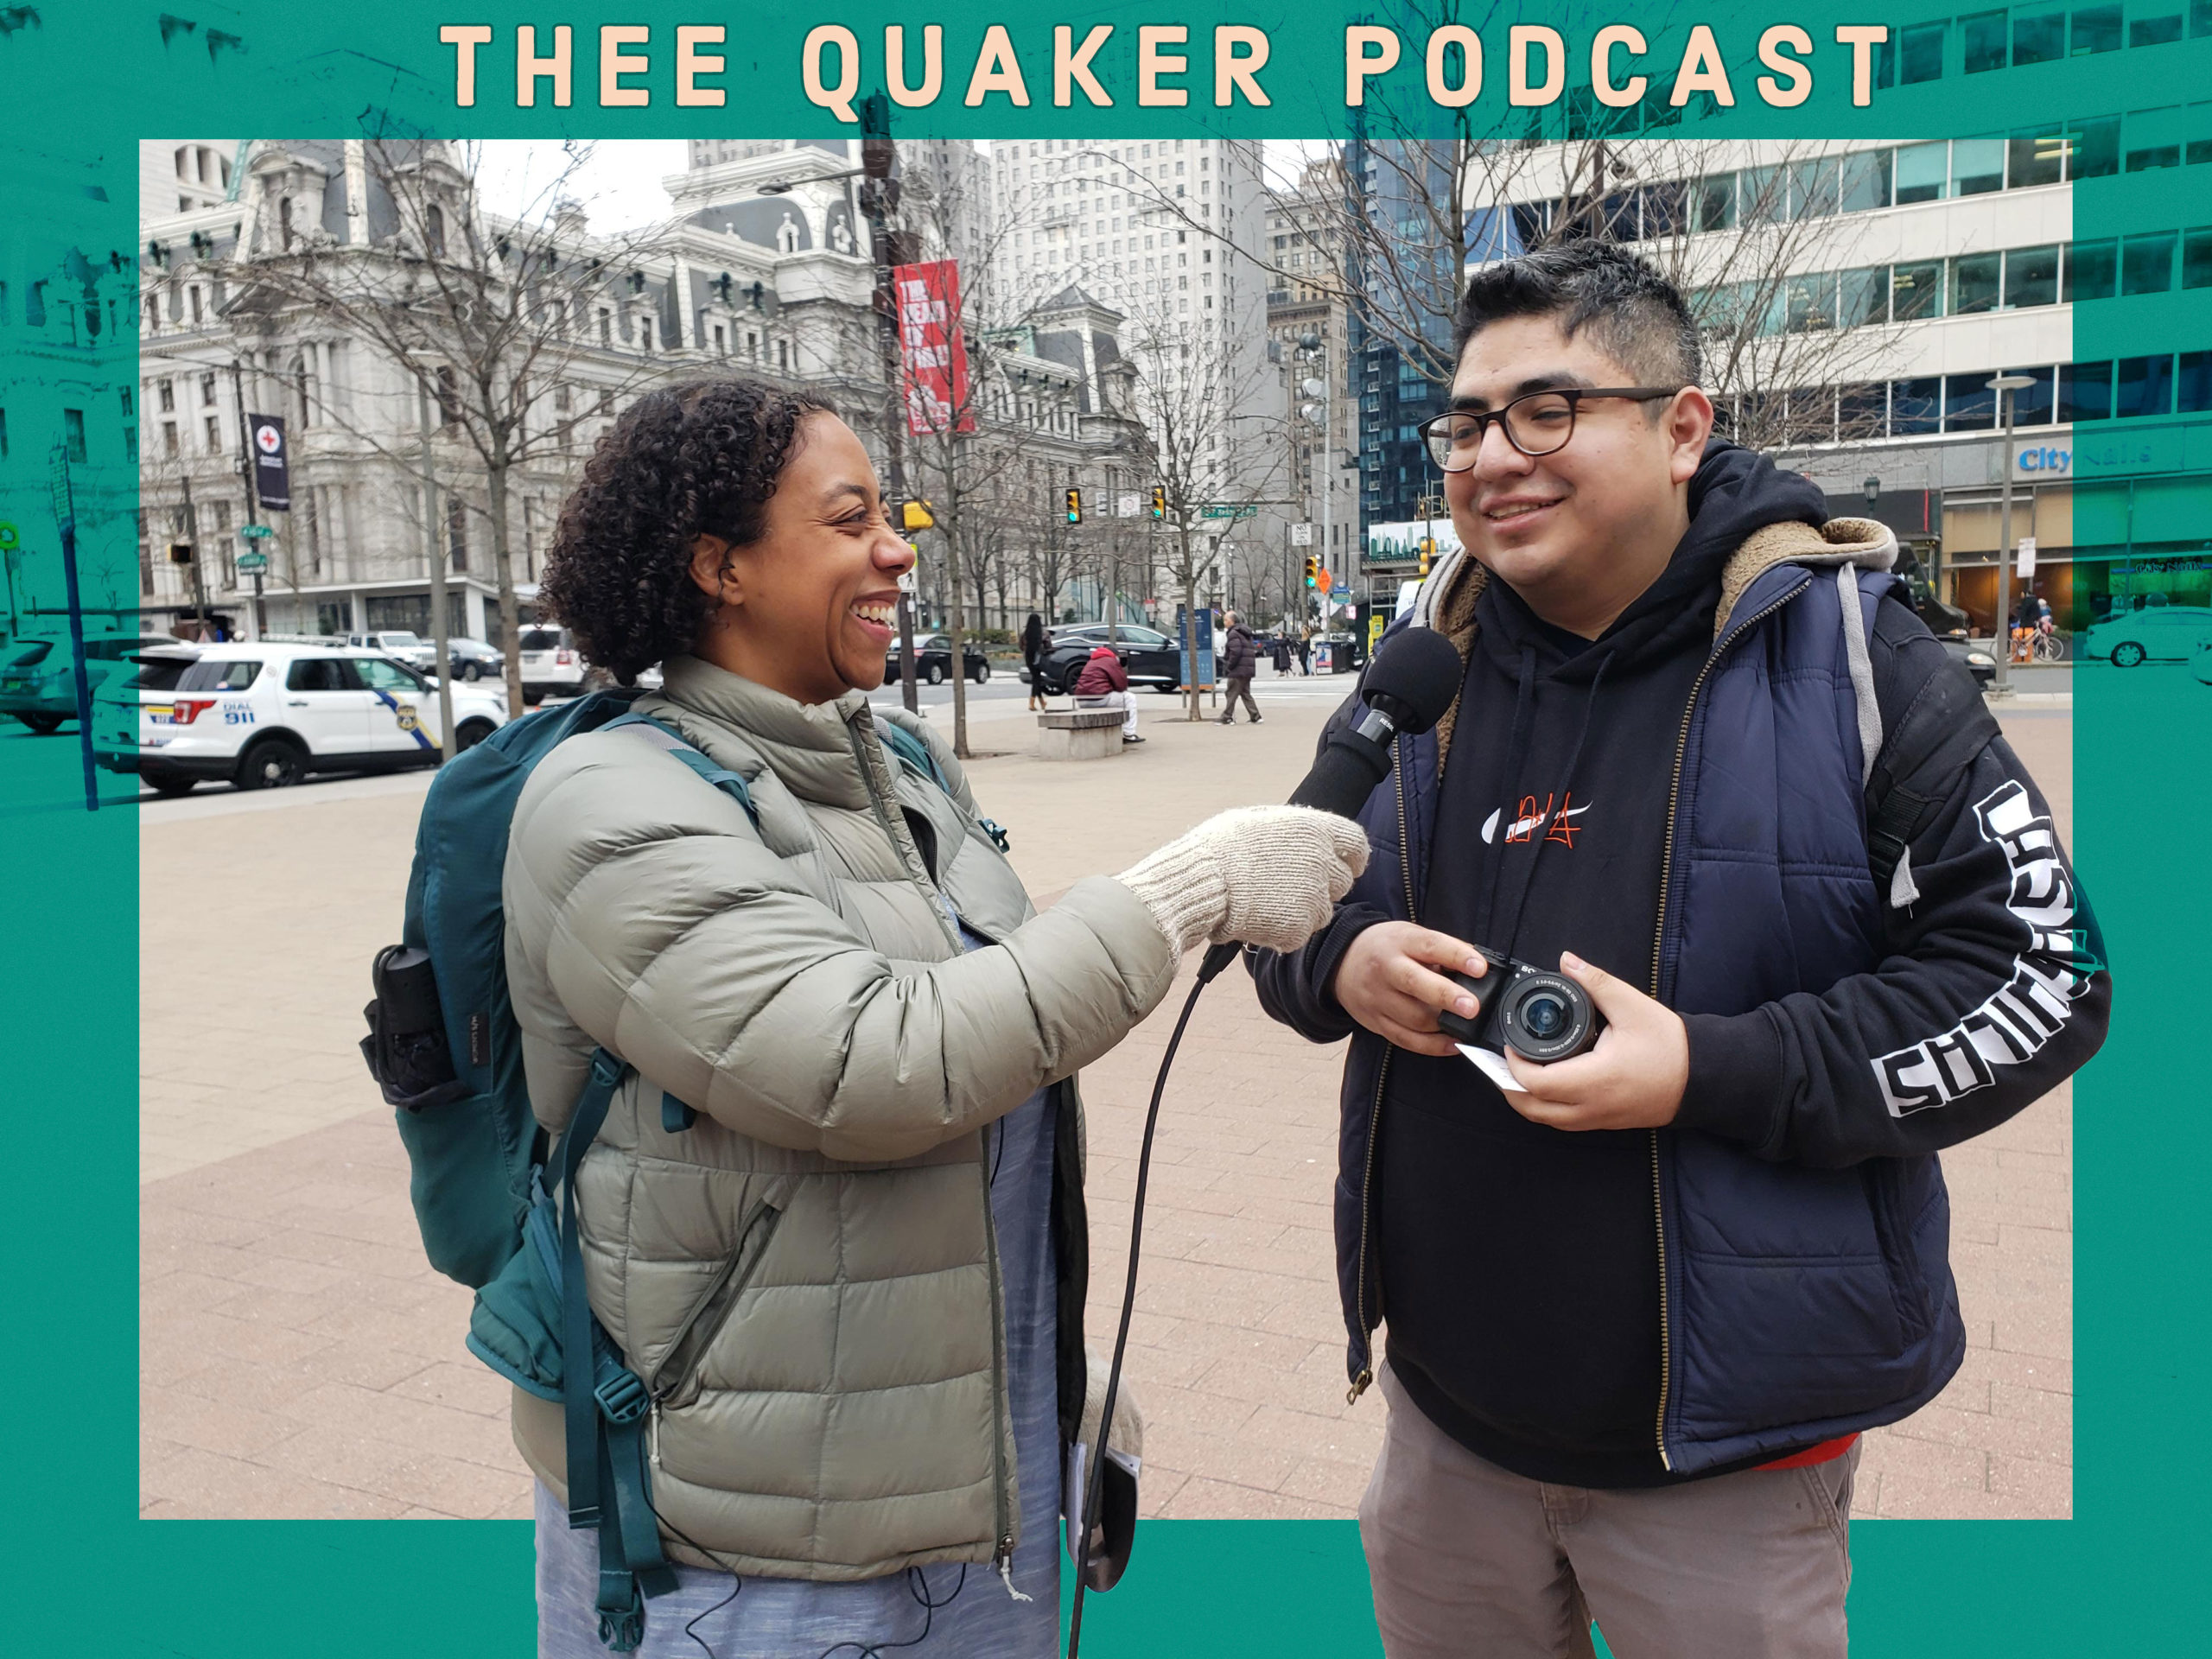 Our Quaker Podcast is Here! (trailer)